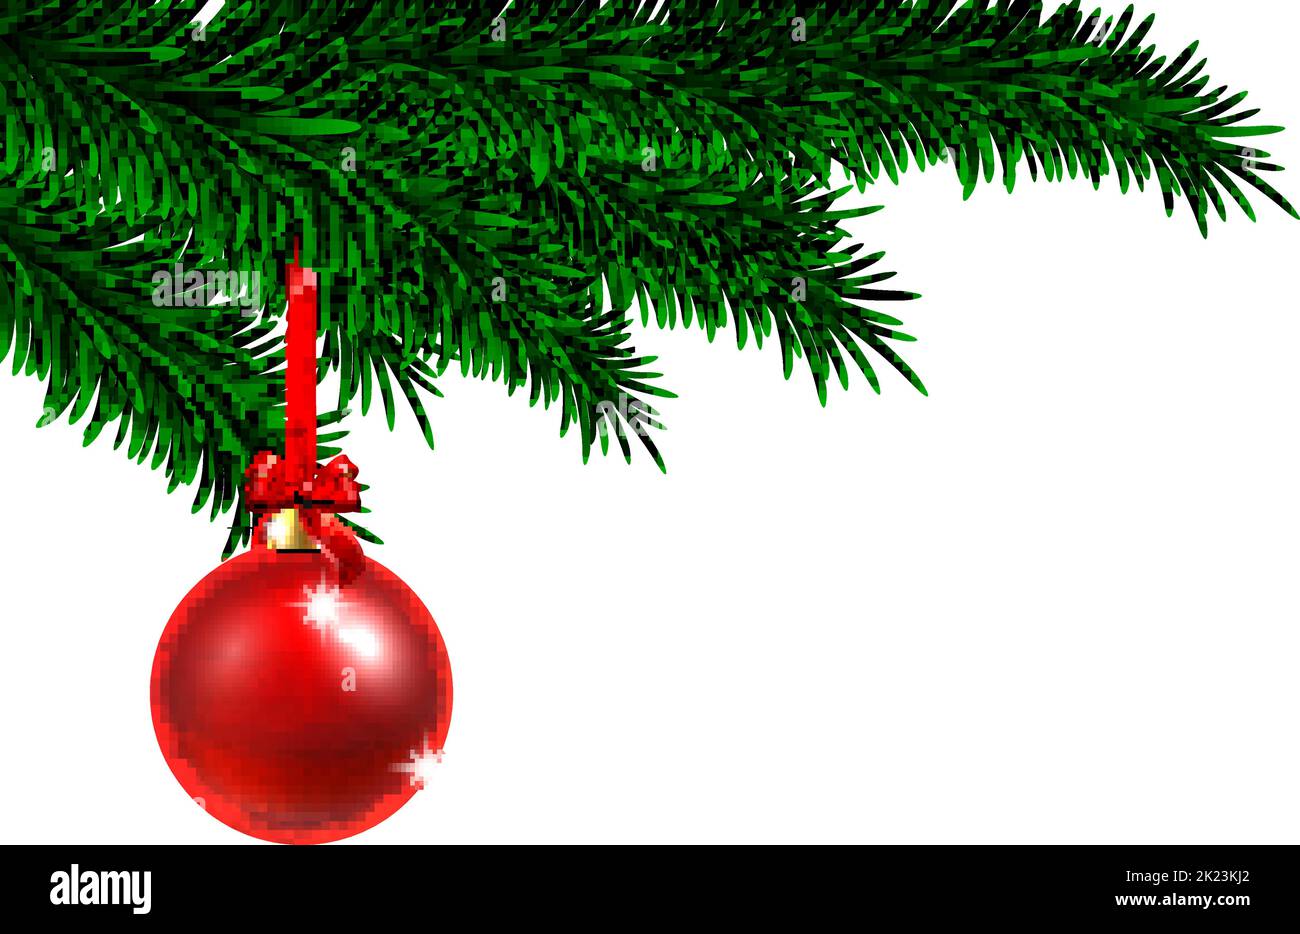 christmas tree red bauble 2022 A2 Stock Vector